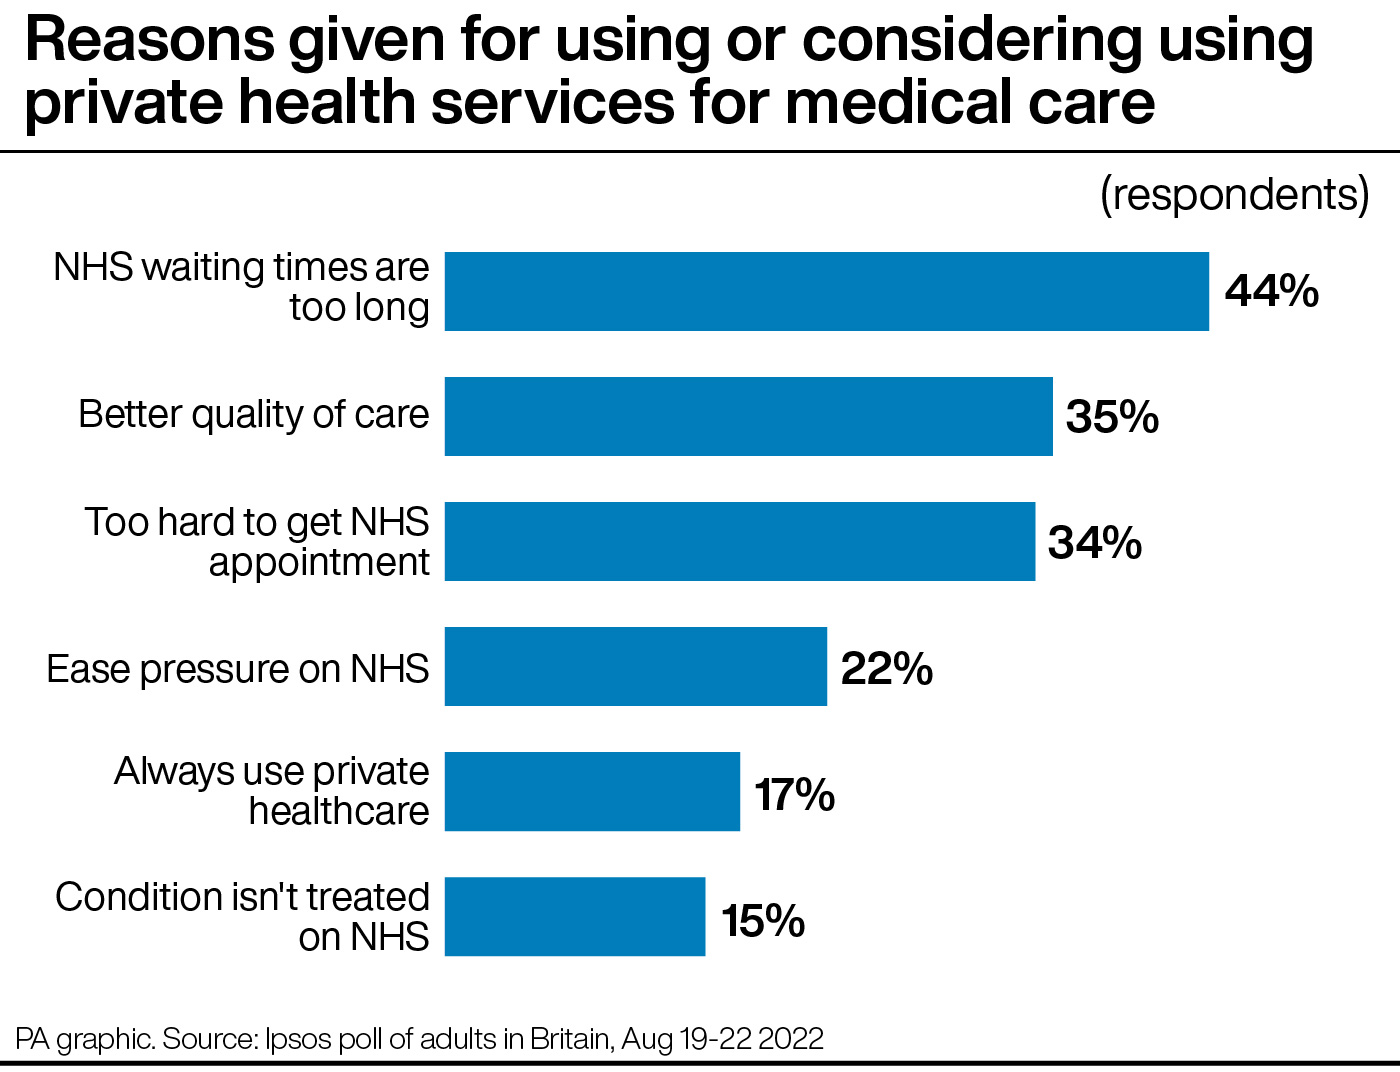 A graphic showing reasons given for using or considering using private health services